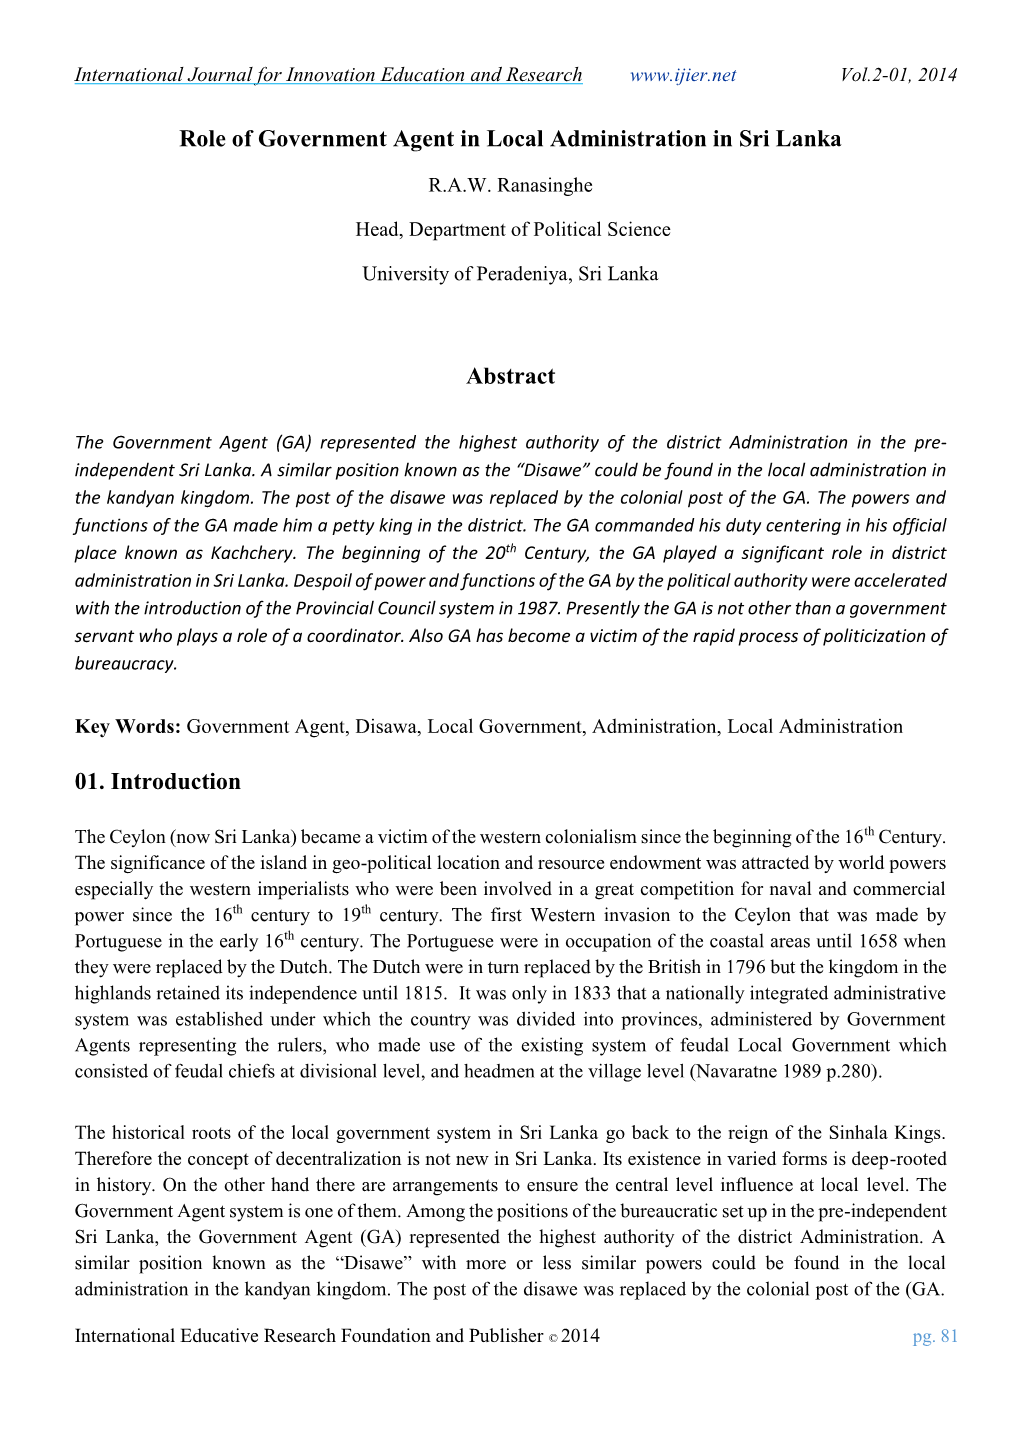 Role of Government Agent in Local Administration in Sri Lanka Abstract